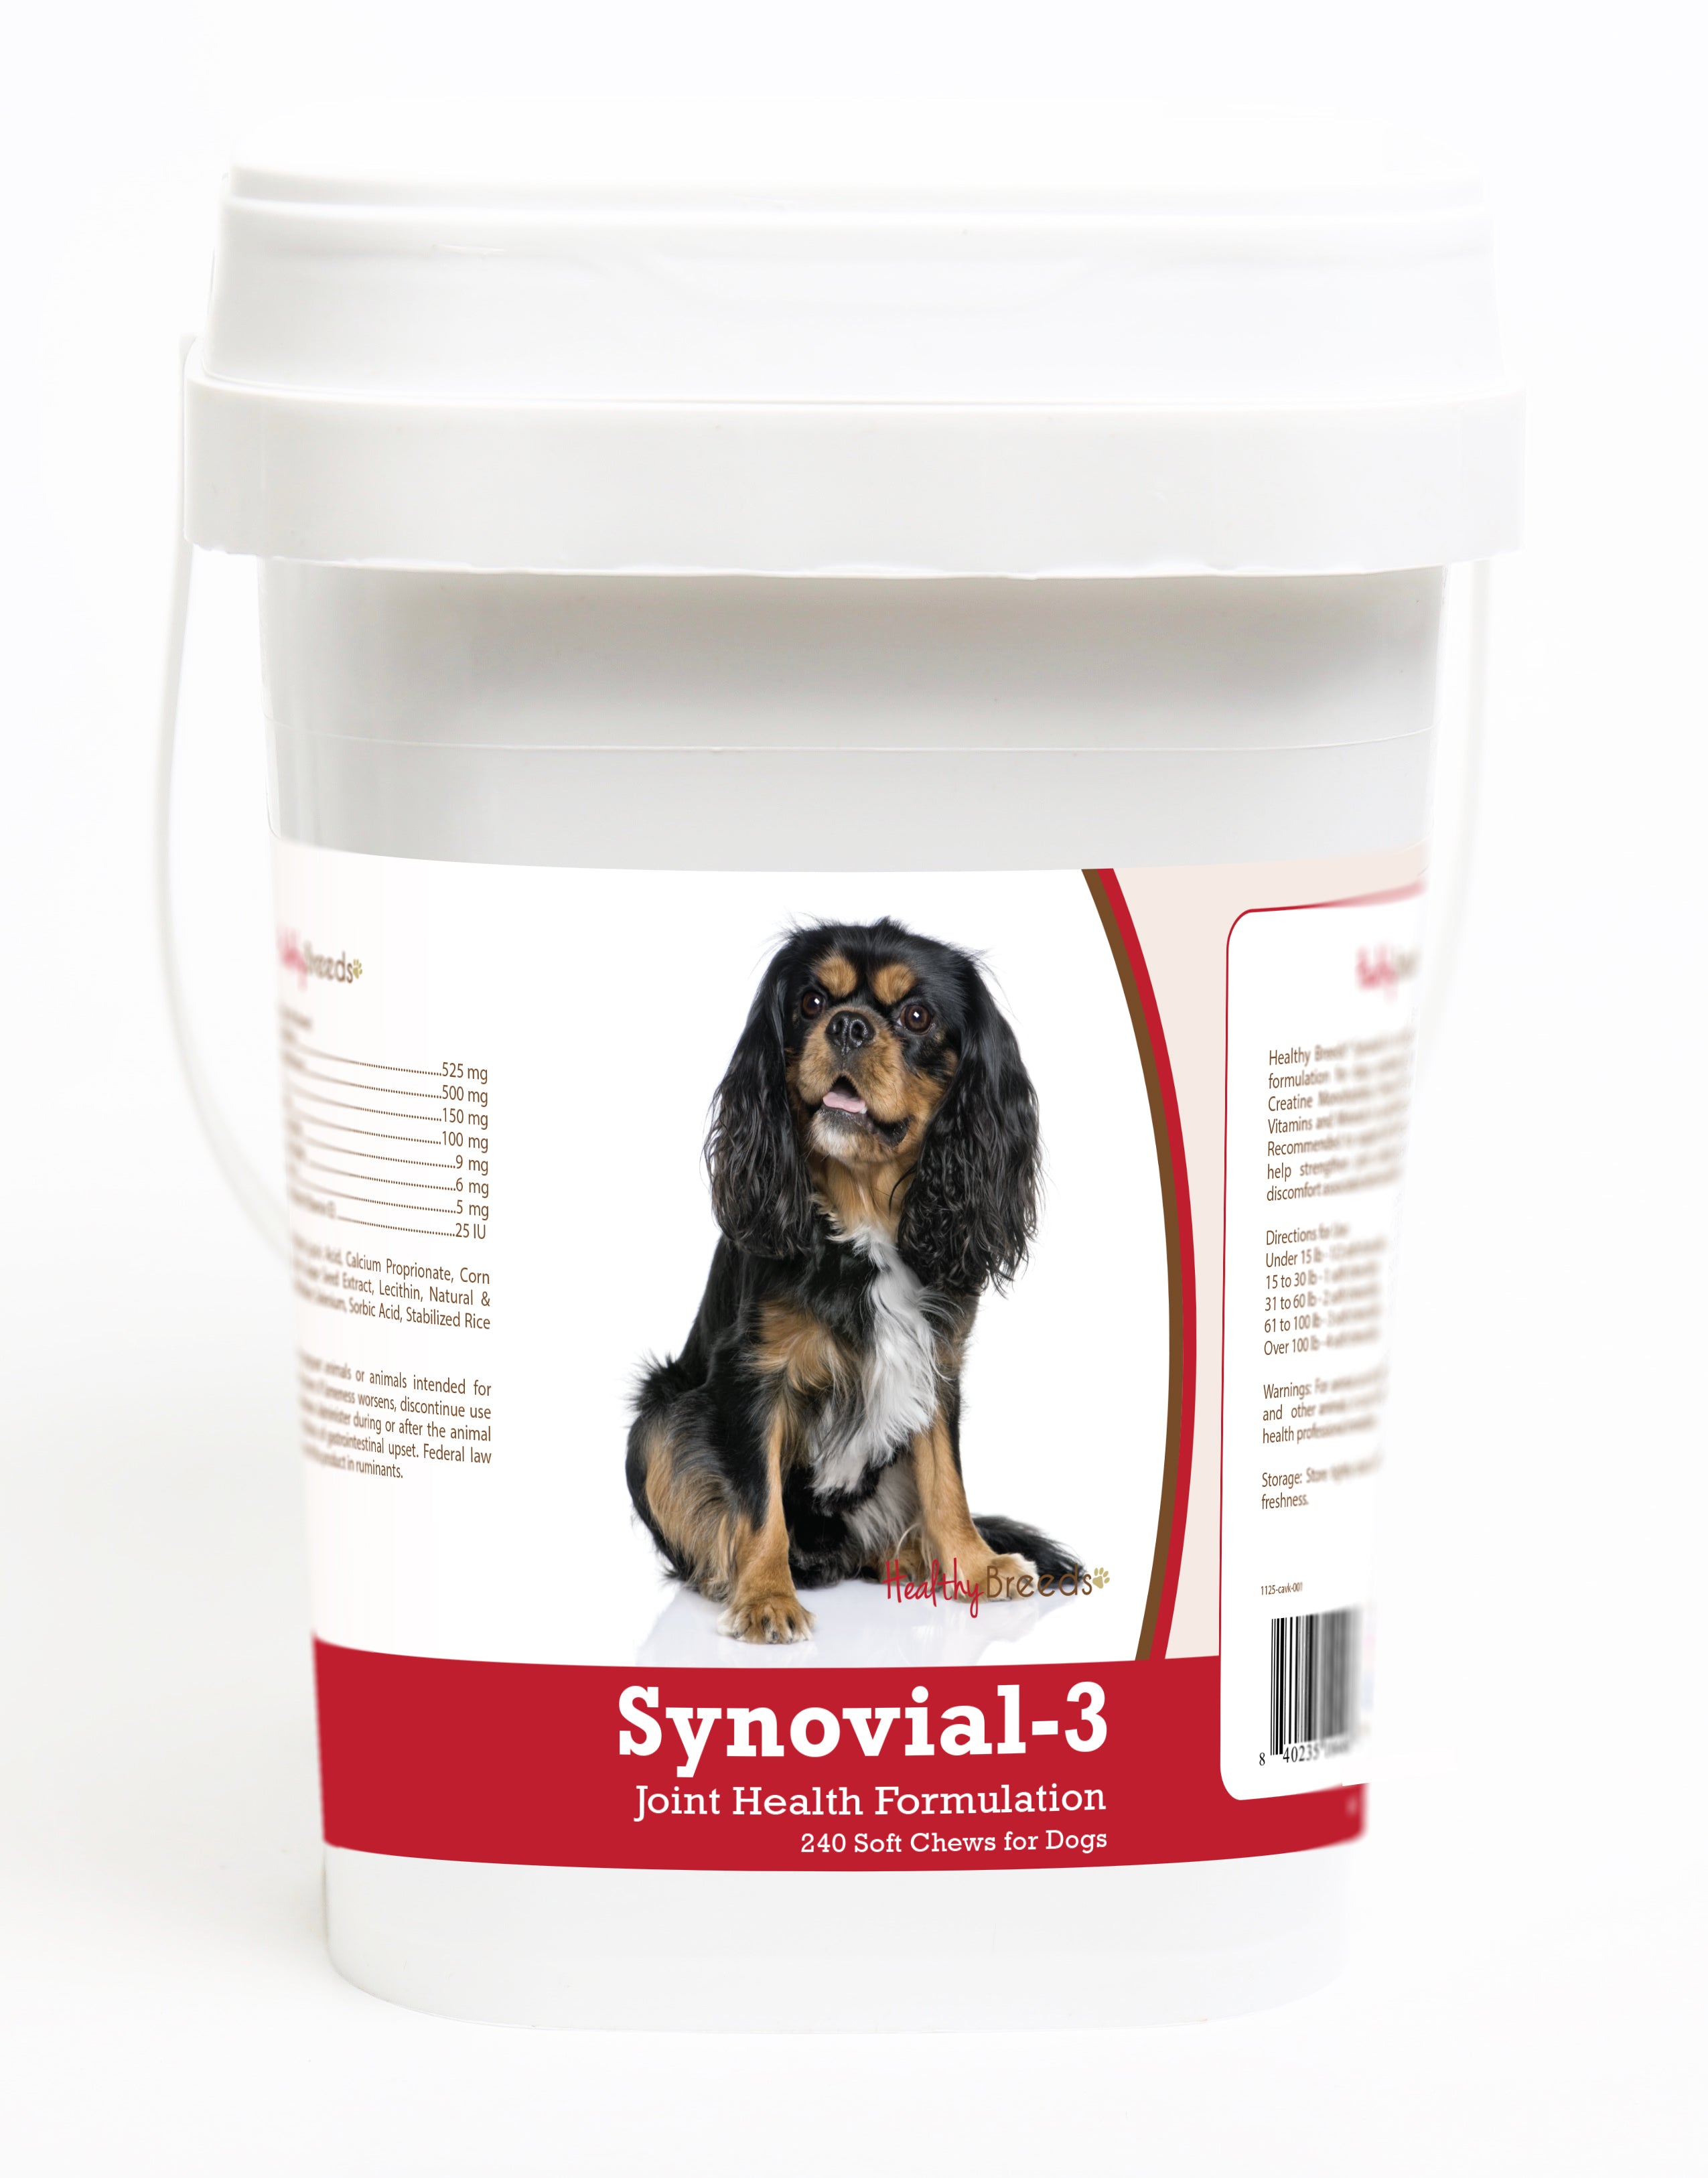 Cavalier King Charles Spaniel Synovial-3 Joint Health Formulation Soft Chews 240 Count